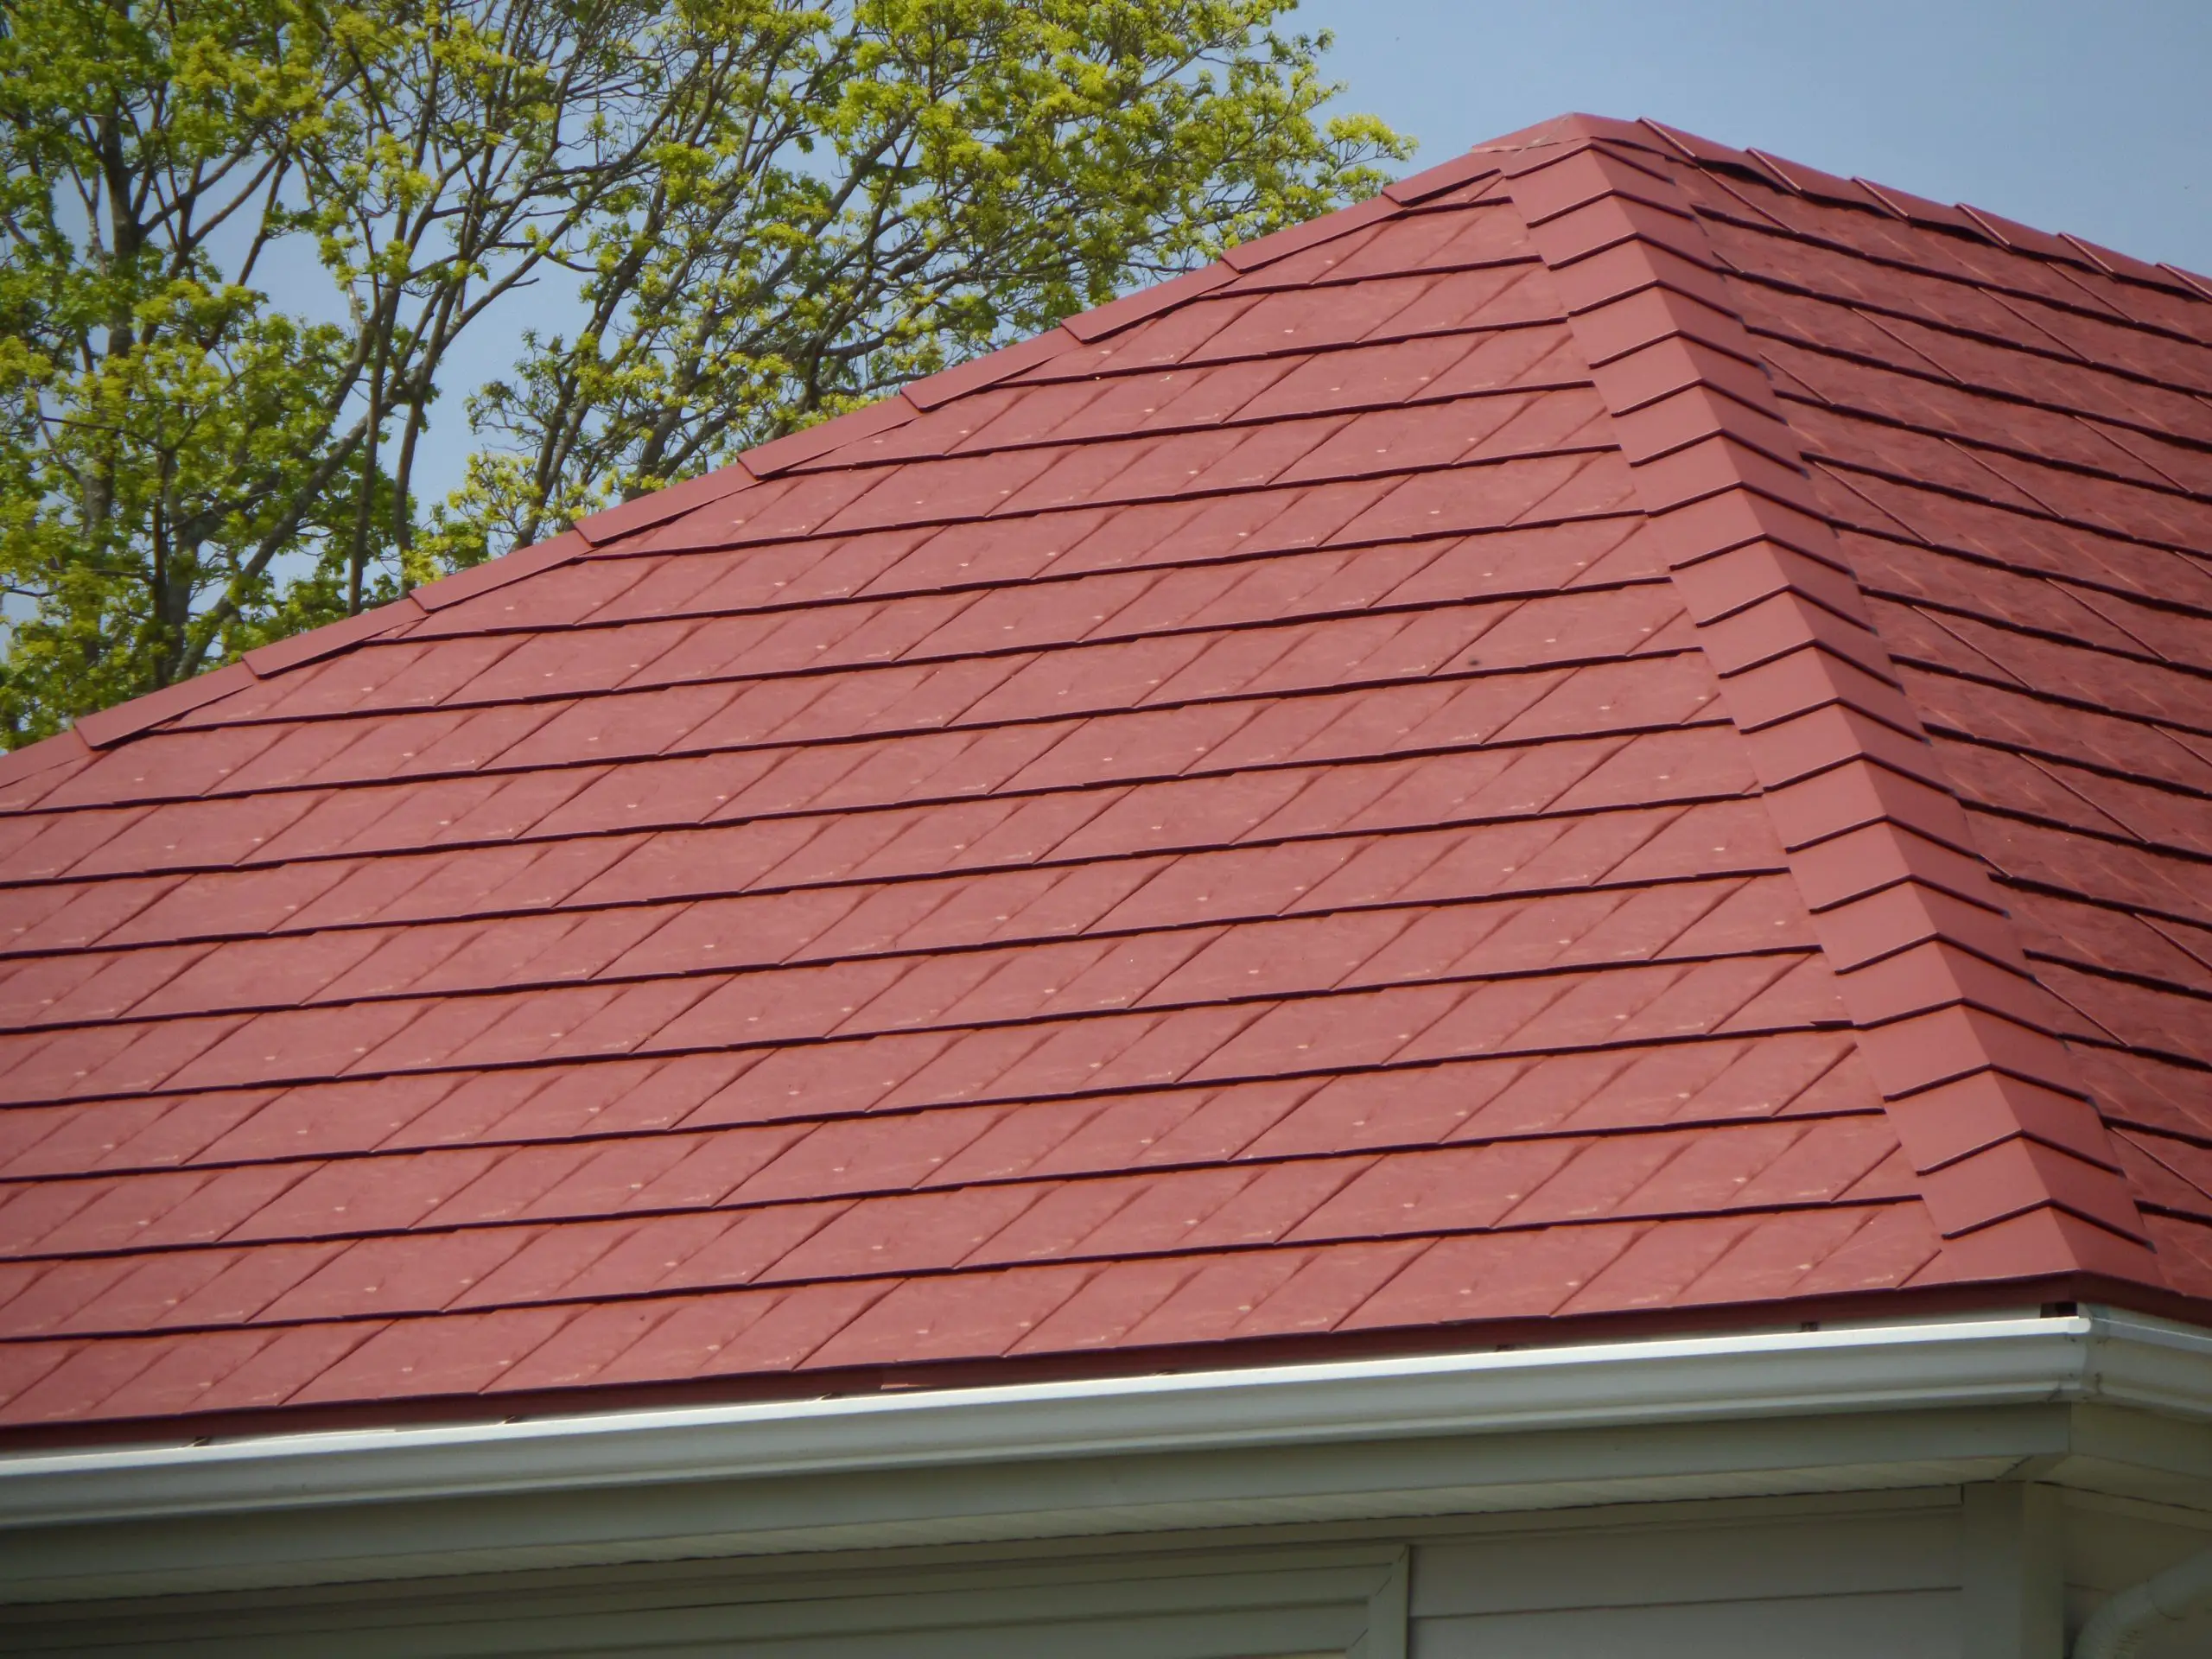 Metal Roof Colors: How to Select the Best Color for a New ...